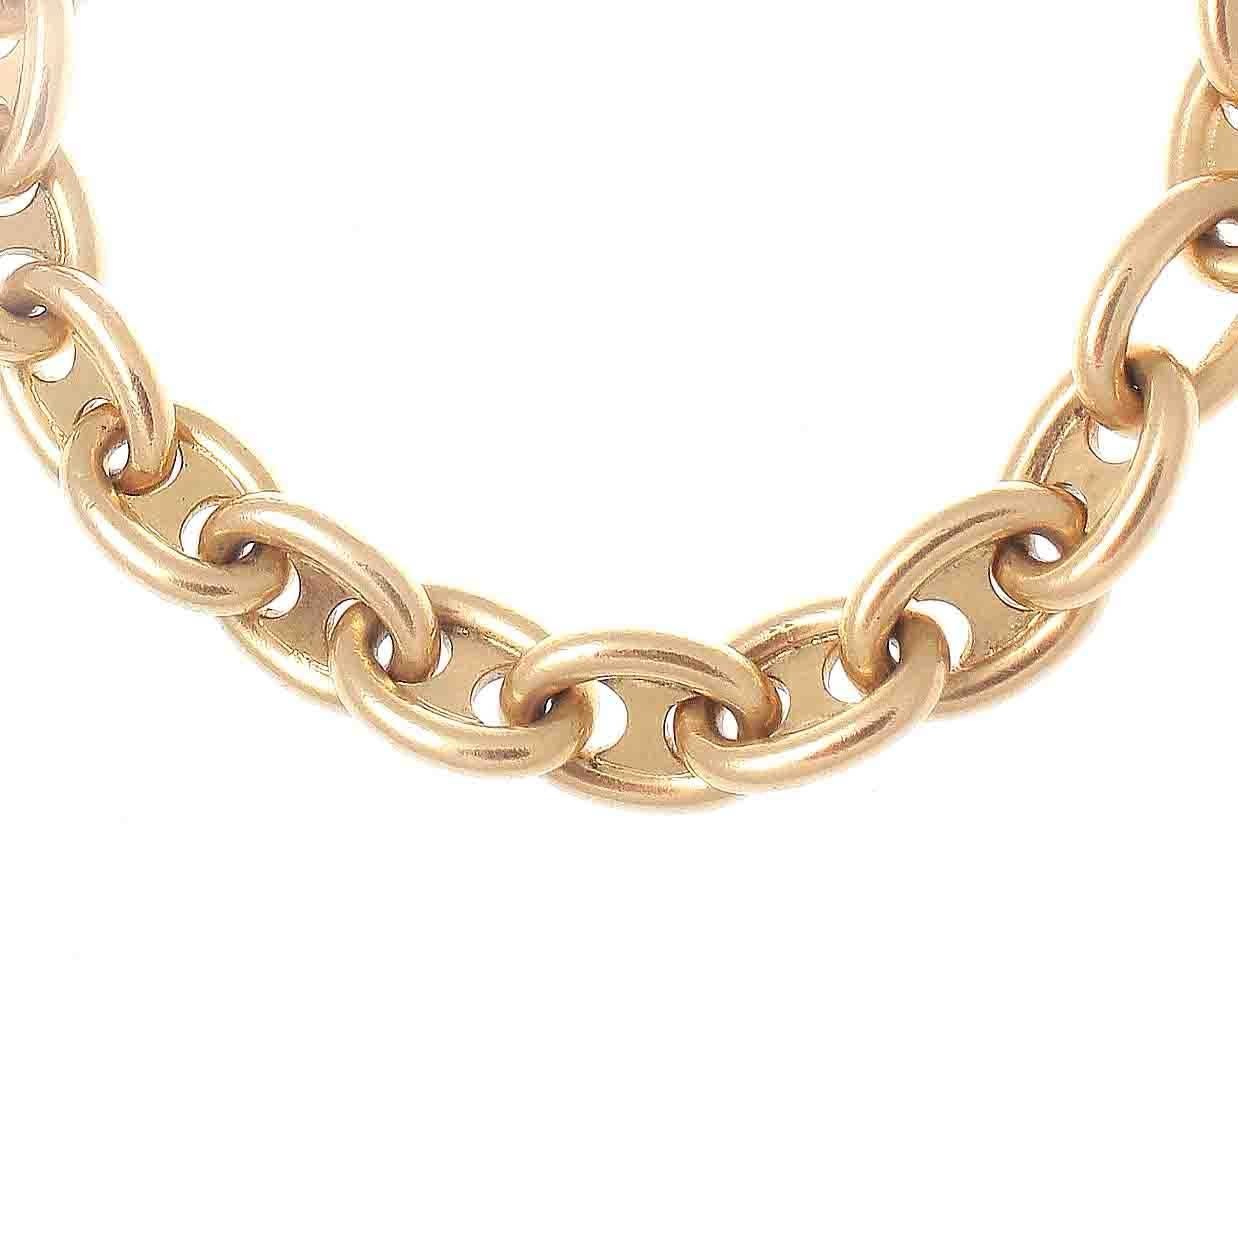 A stylish and elegant that is bold and easy to wear. This desirable creation features perfectly interlocking links of glistening 18k gold. Stamped with French hallmarks. 7 inches long.